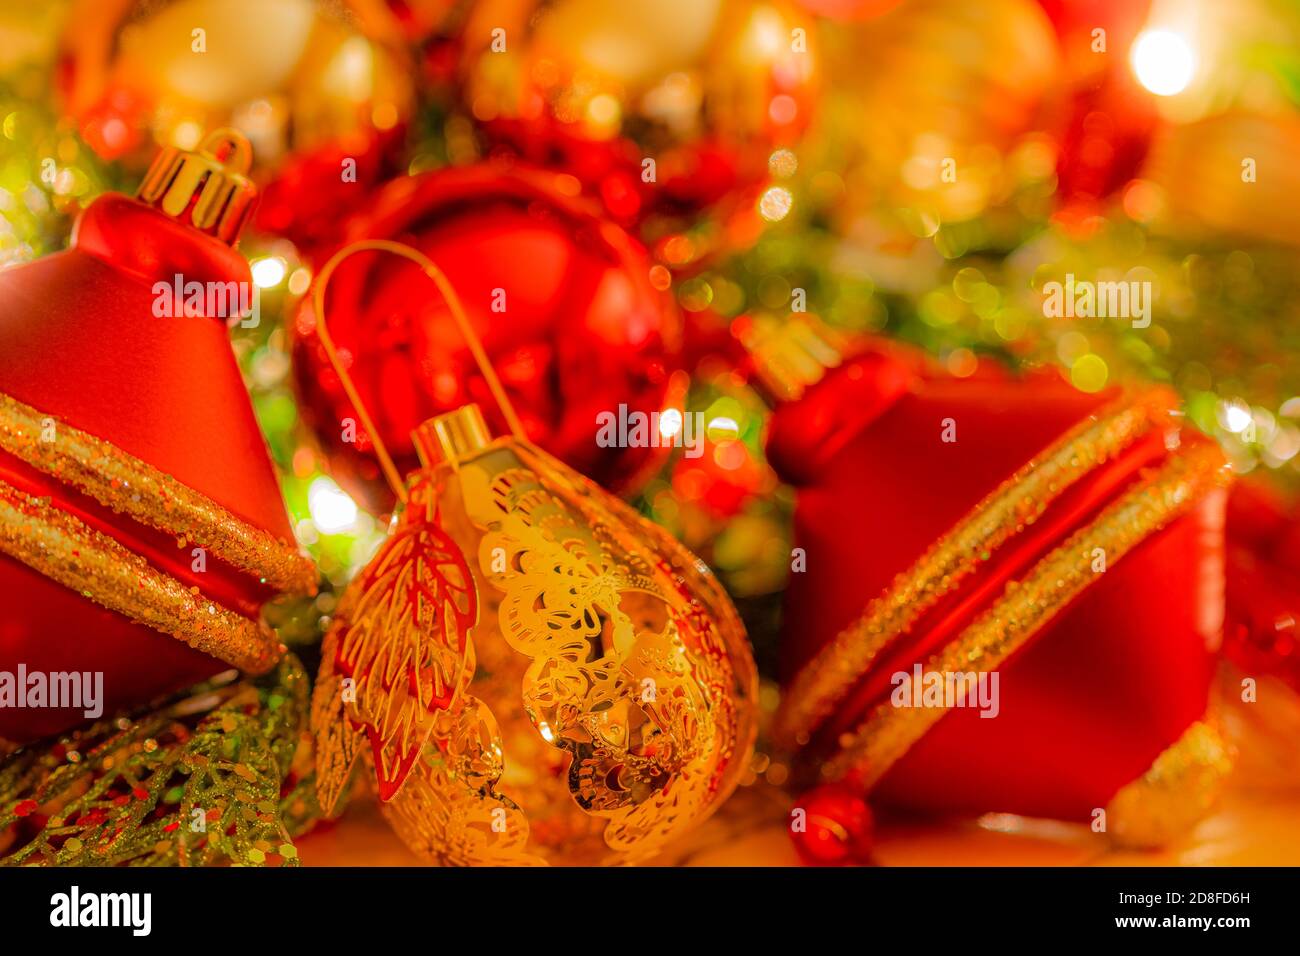 Christmas ornament in gold color is finely detailed and is surrounded by soft focus ornaments in bright colors. Stock Photo